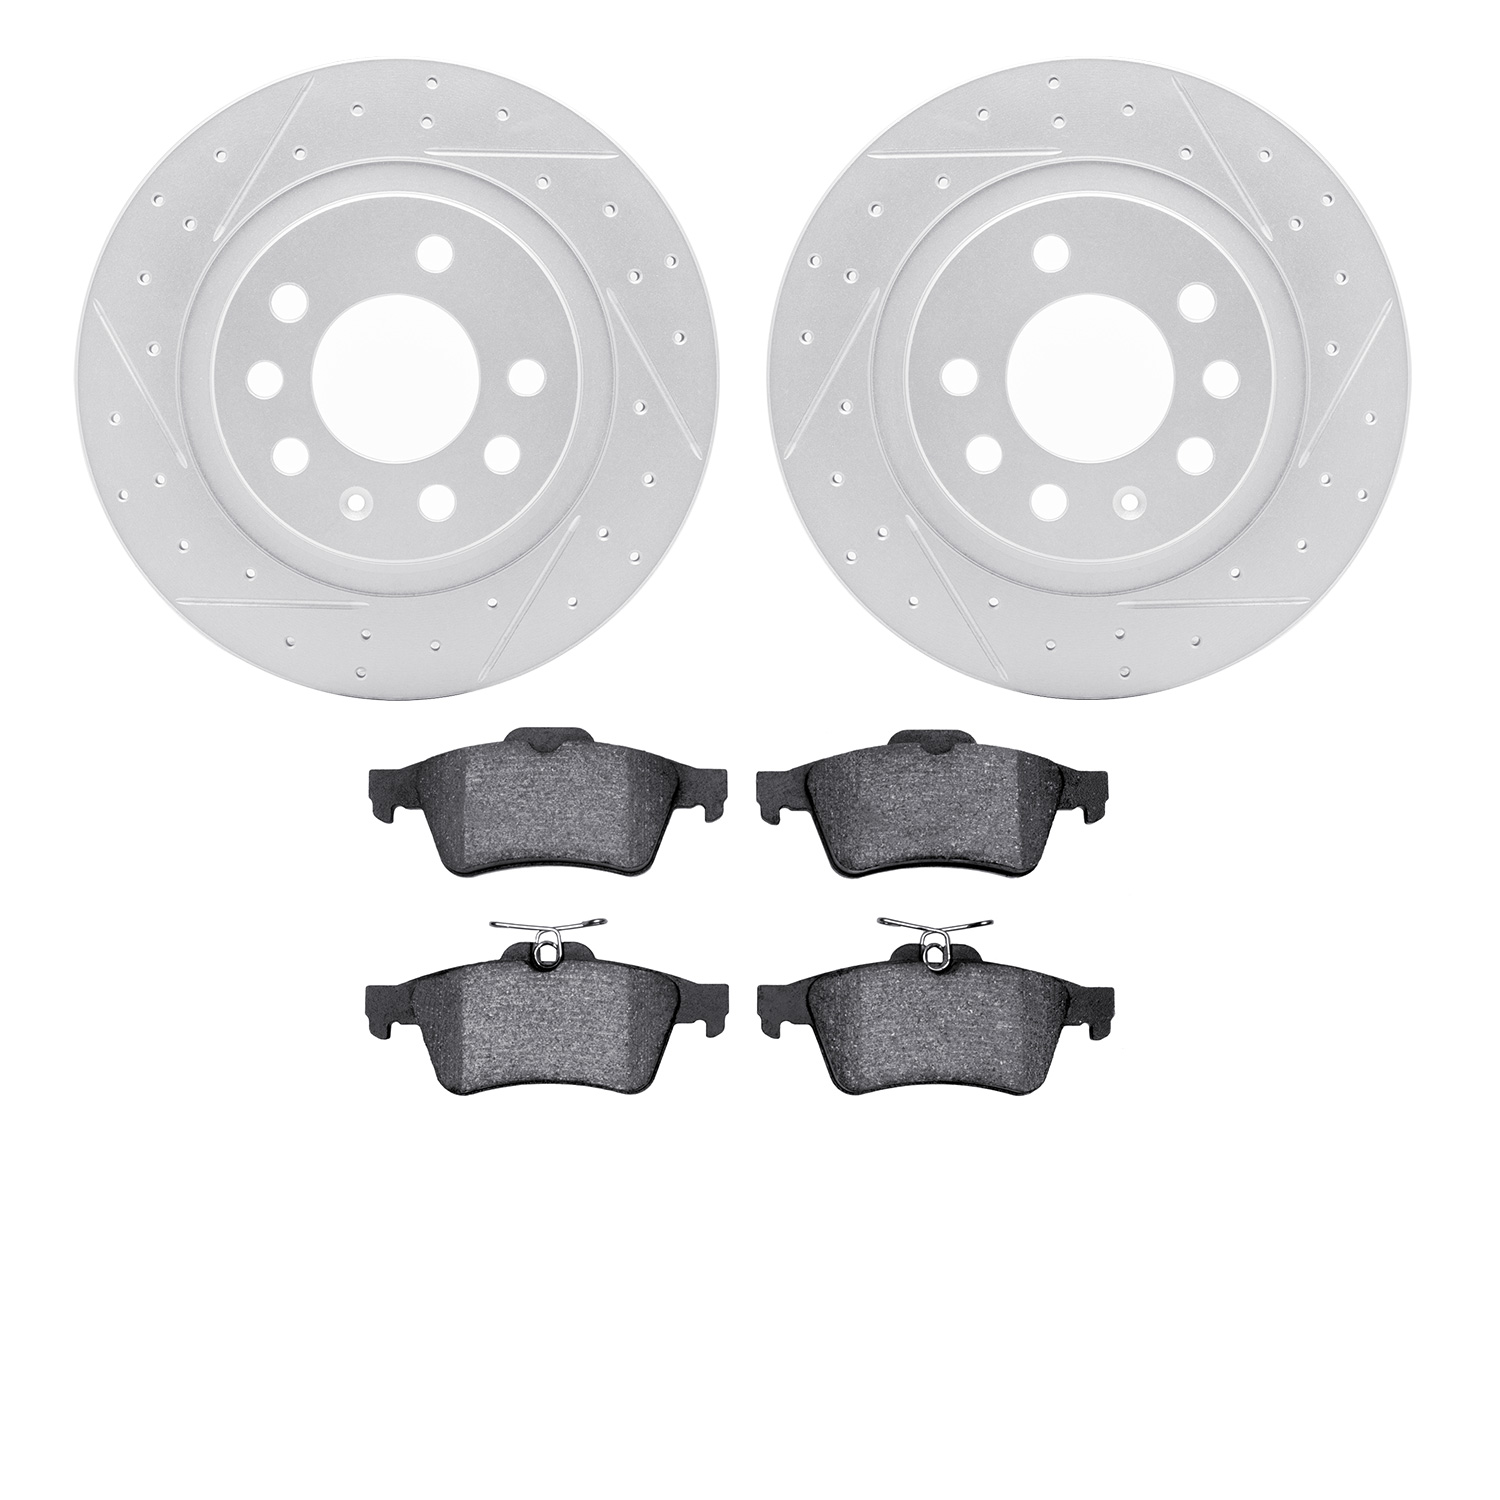 2502-53008 Geoperformance Drilled/Slotted Rotors w/5000 Advanced Brake Pads Kit, 2006-2010 GM, Position: Rear